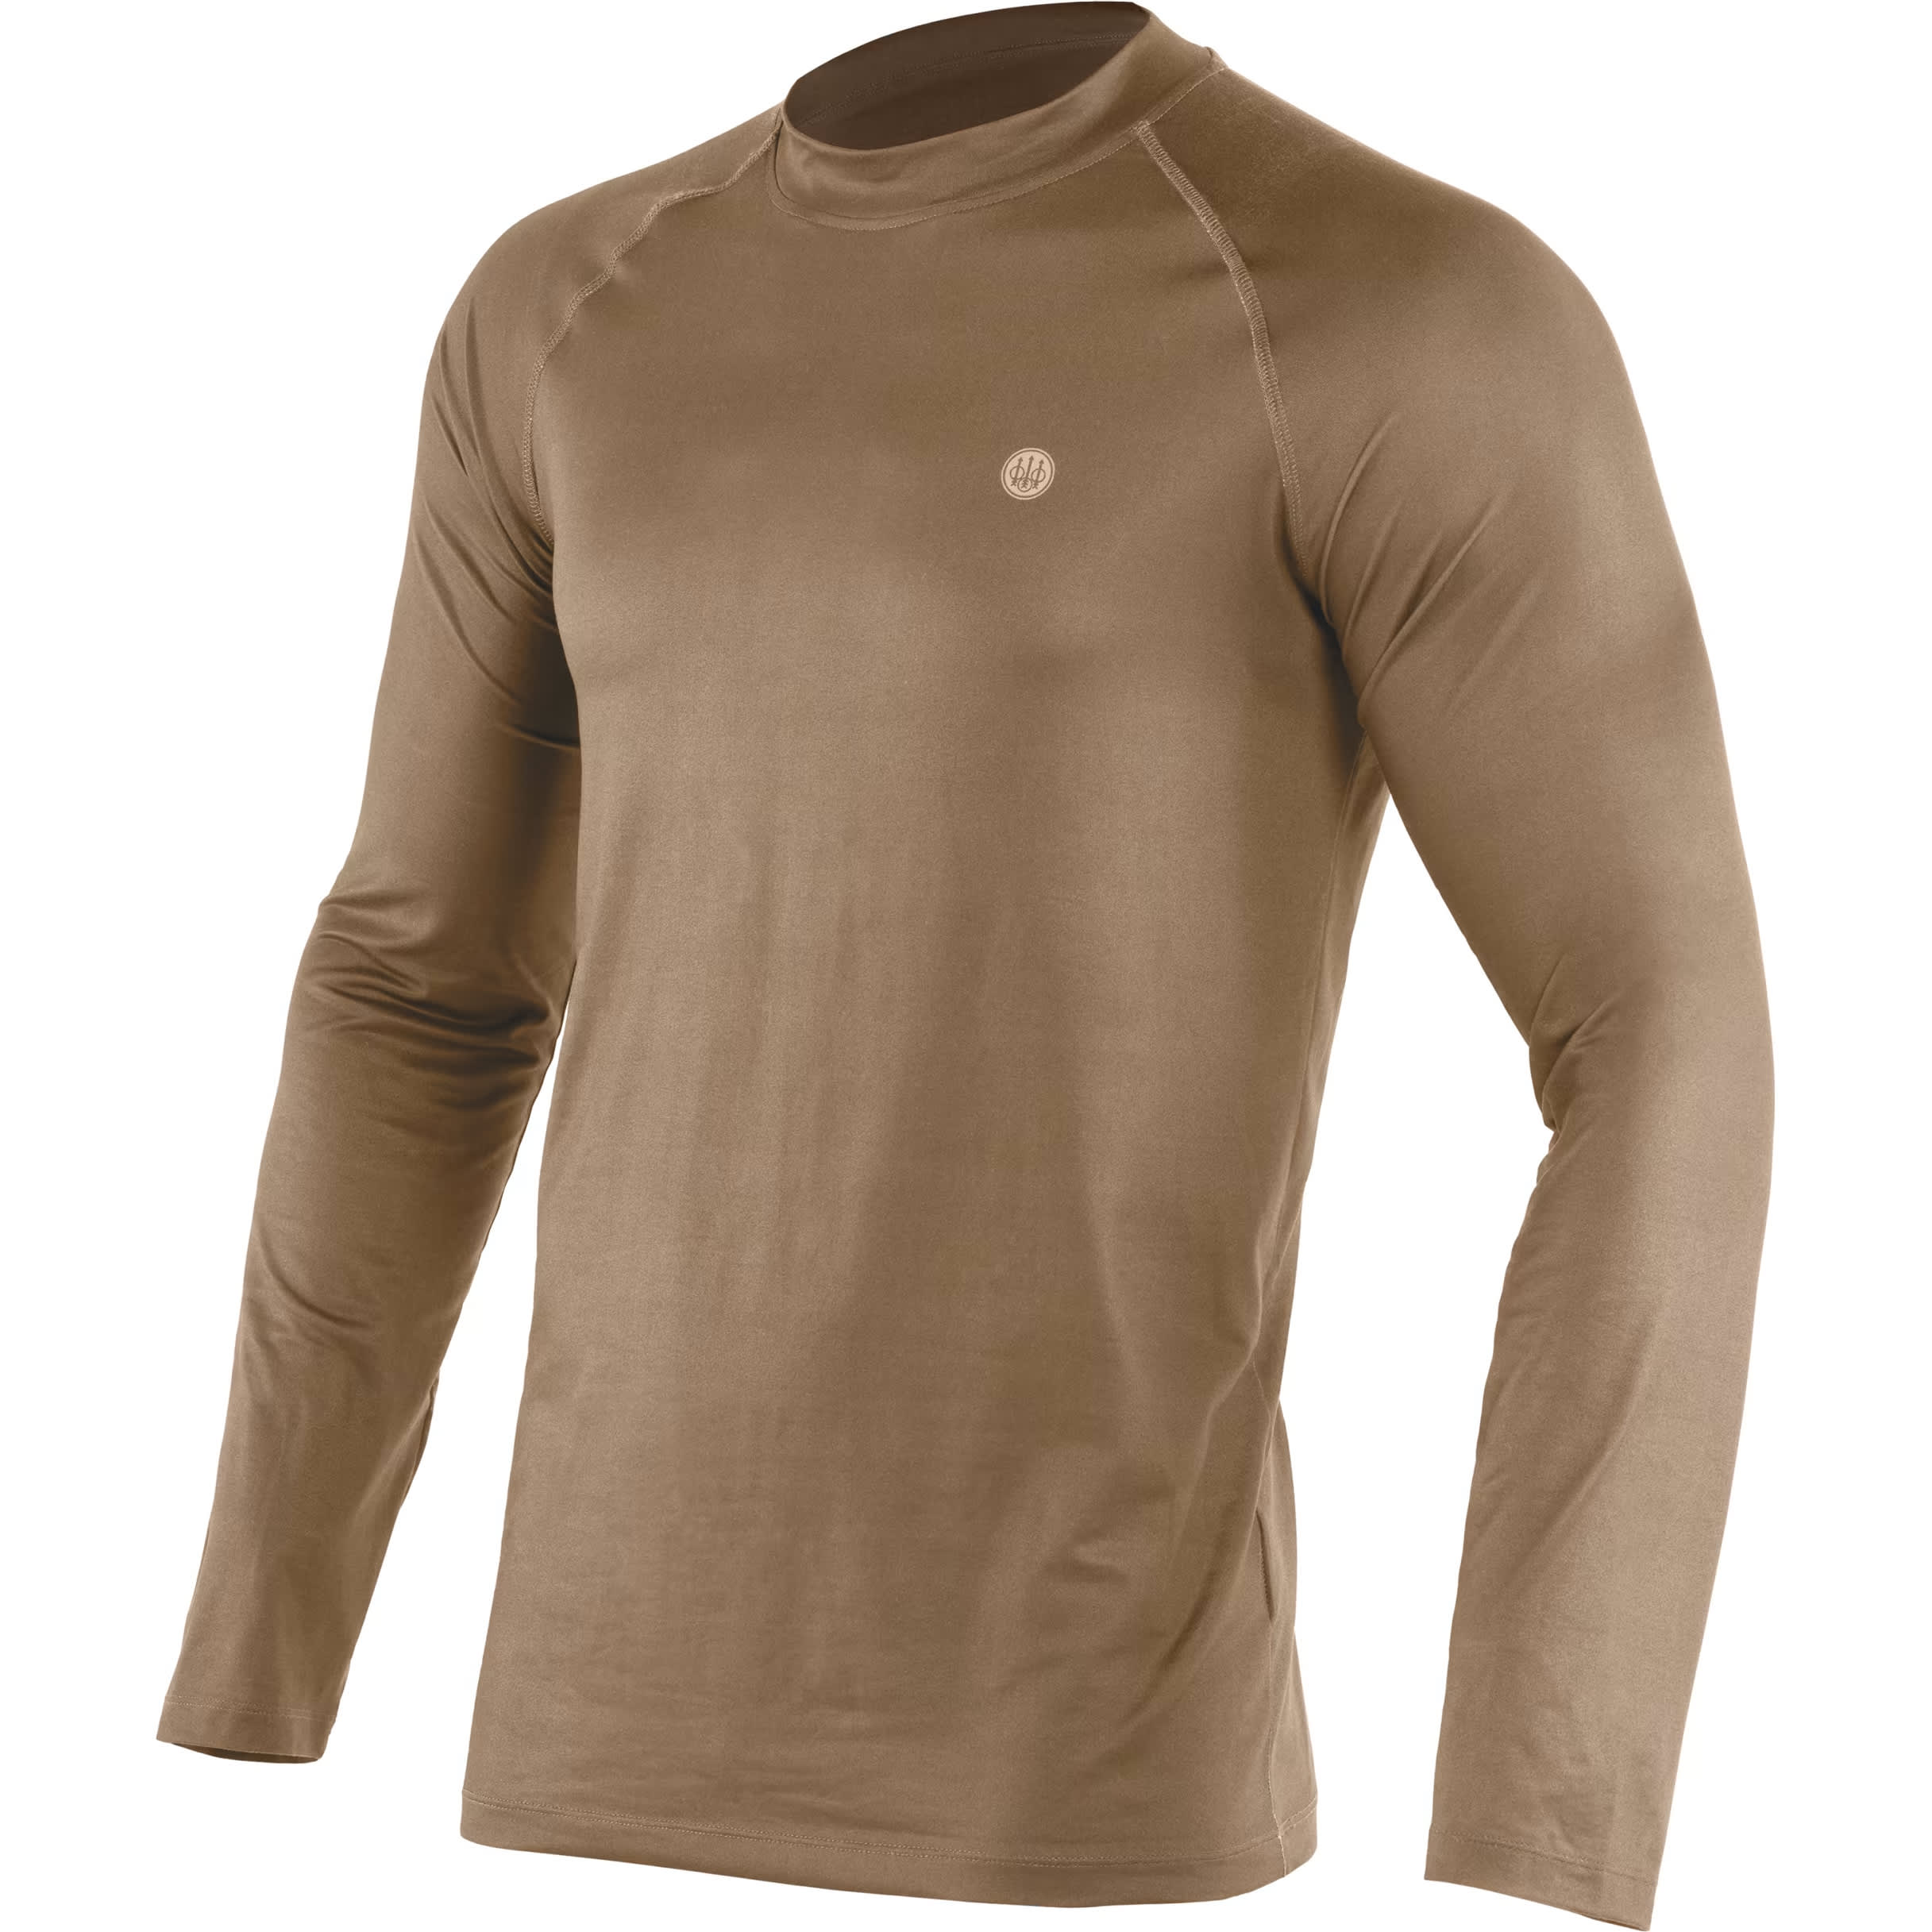 Under Armour Men's ColdGear Infrared Camo Mock-Neck Long-Sleeve Shirt -  727599, Base Layer at Sportsman's Guide